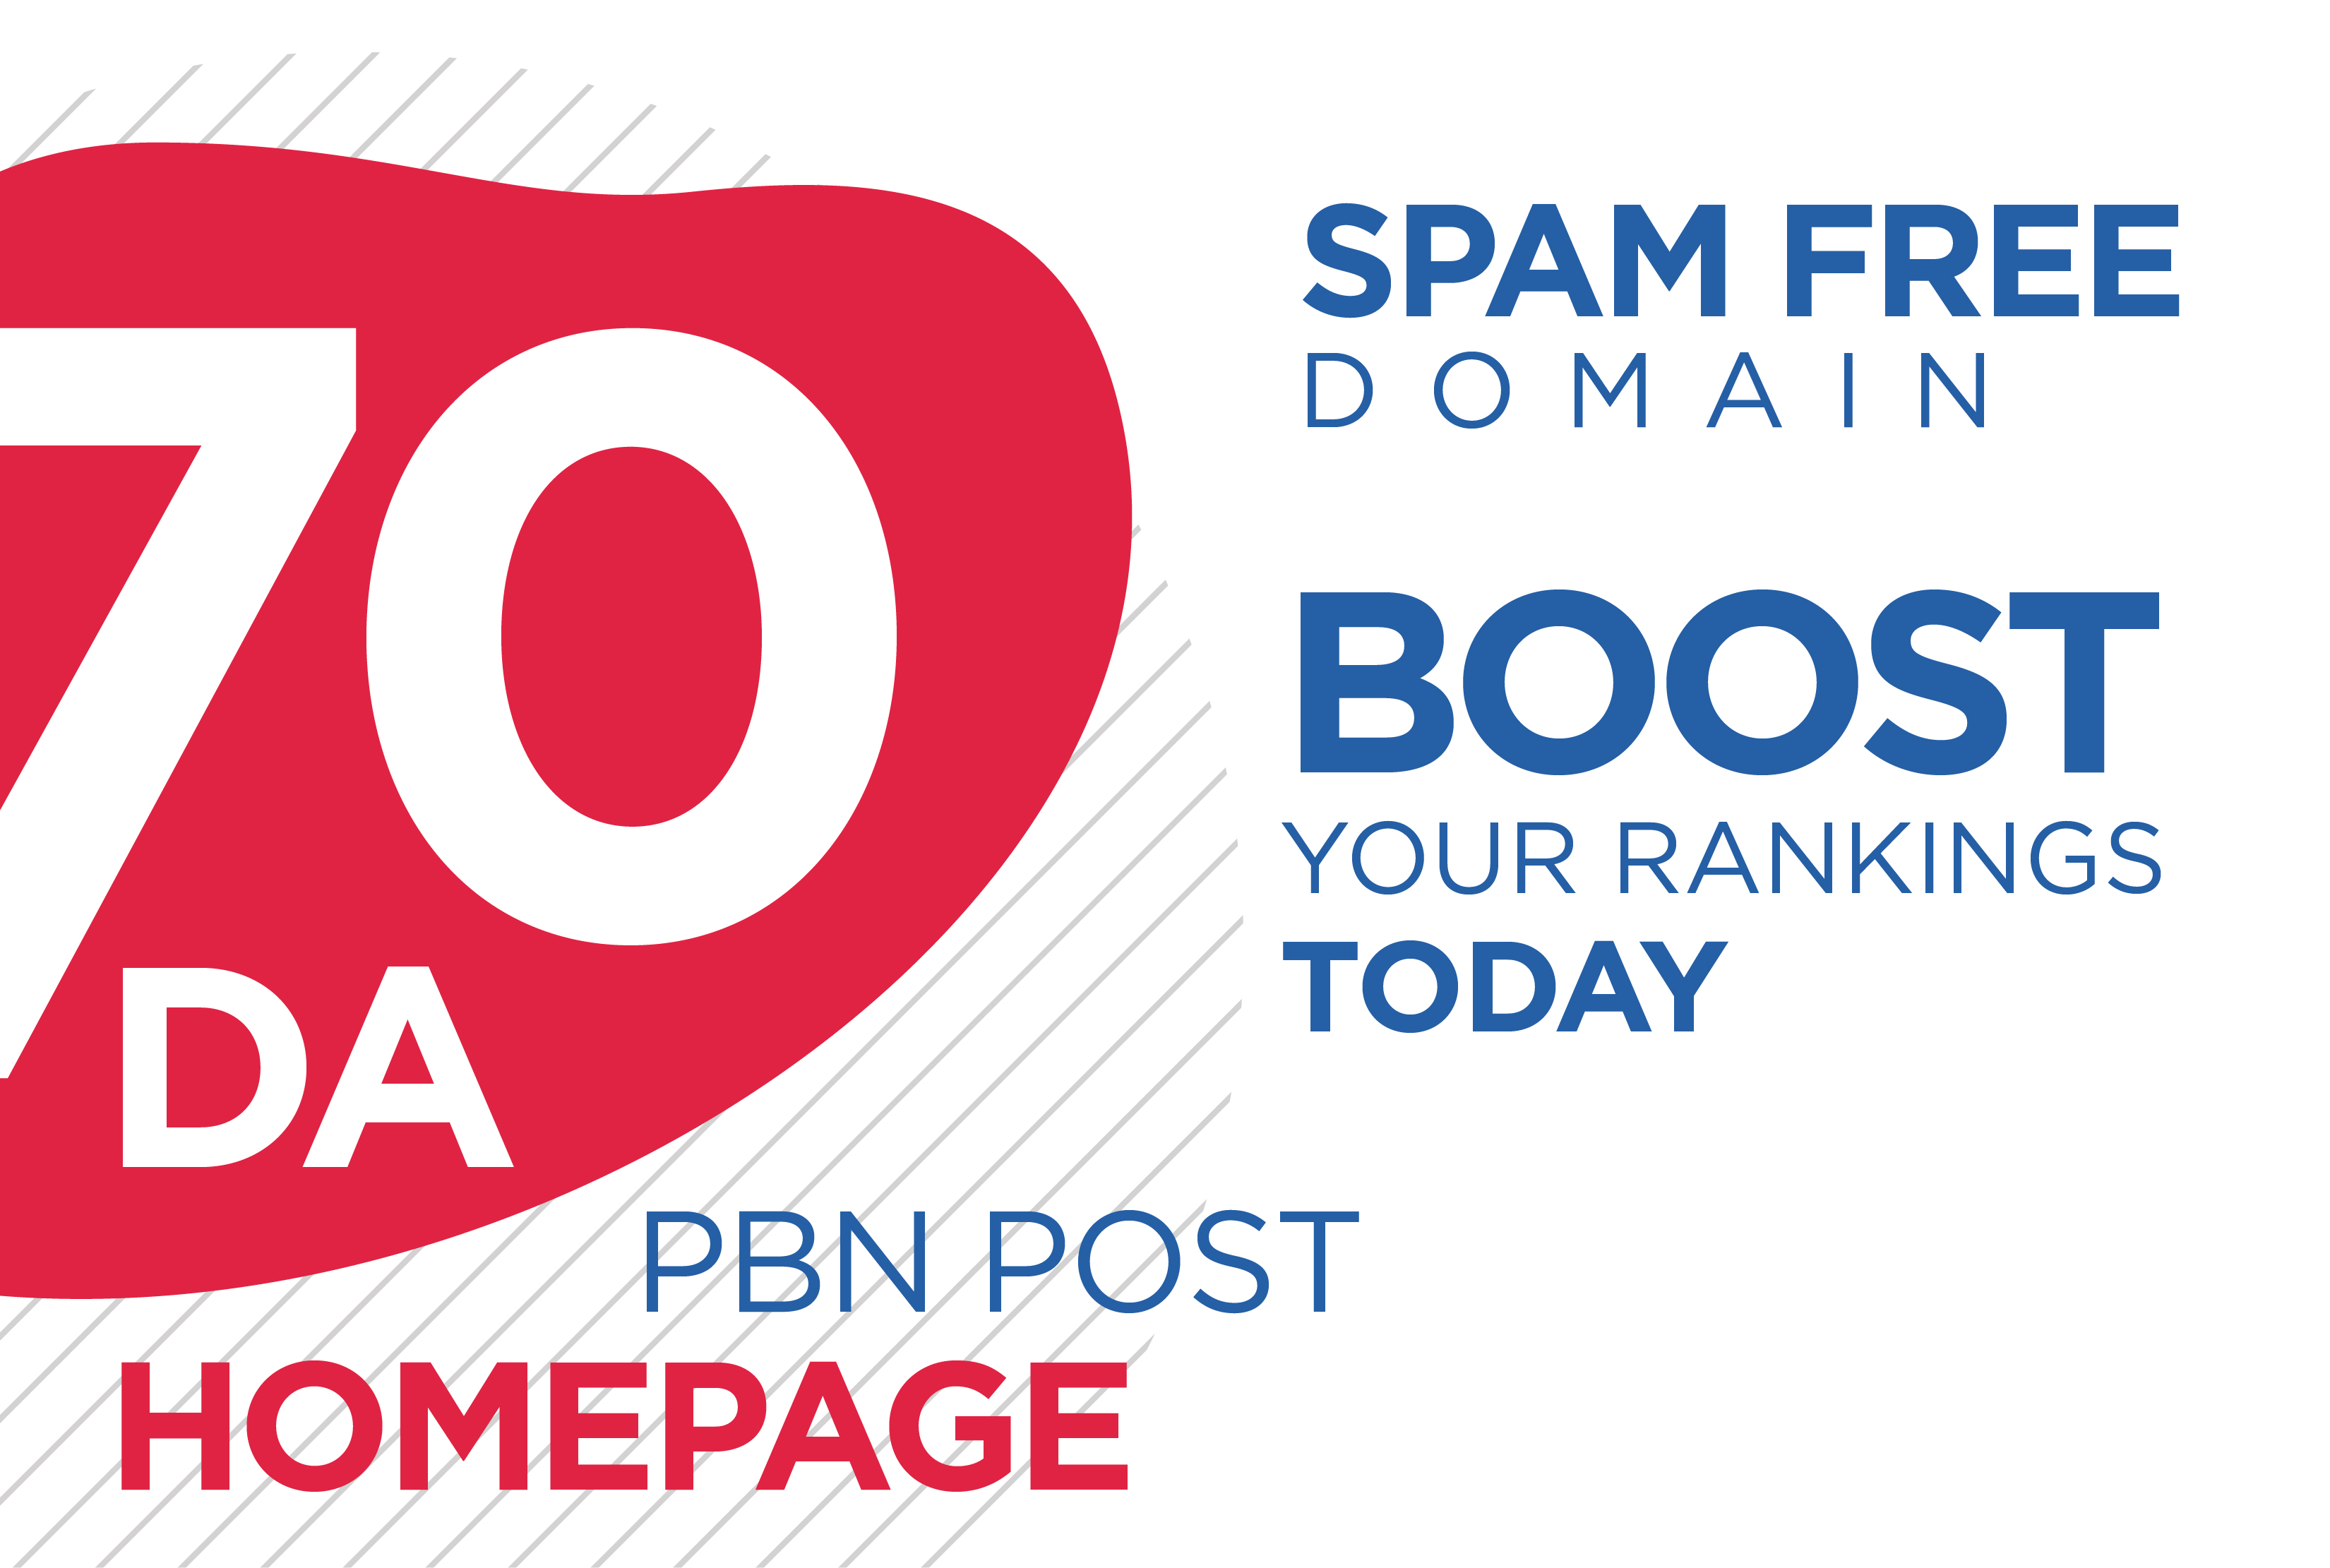 Get REAL 70DA PBN HOME POST And Boost Your Ranking